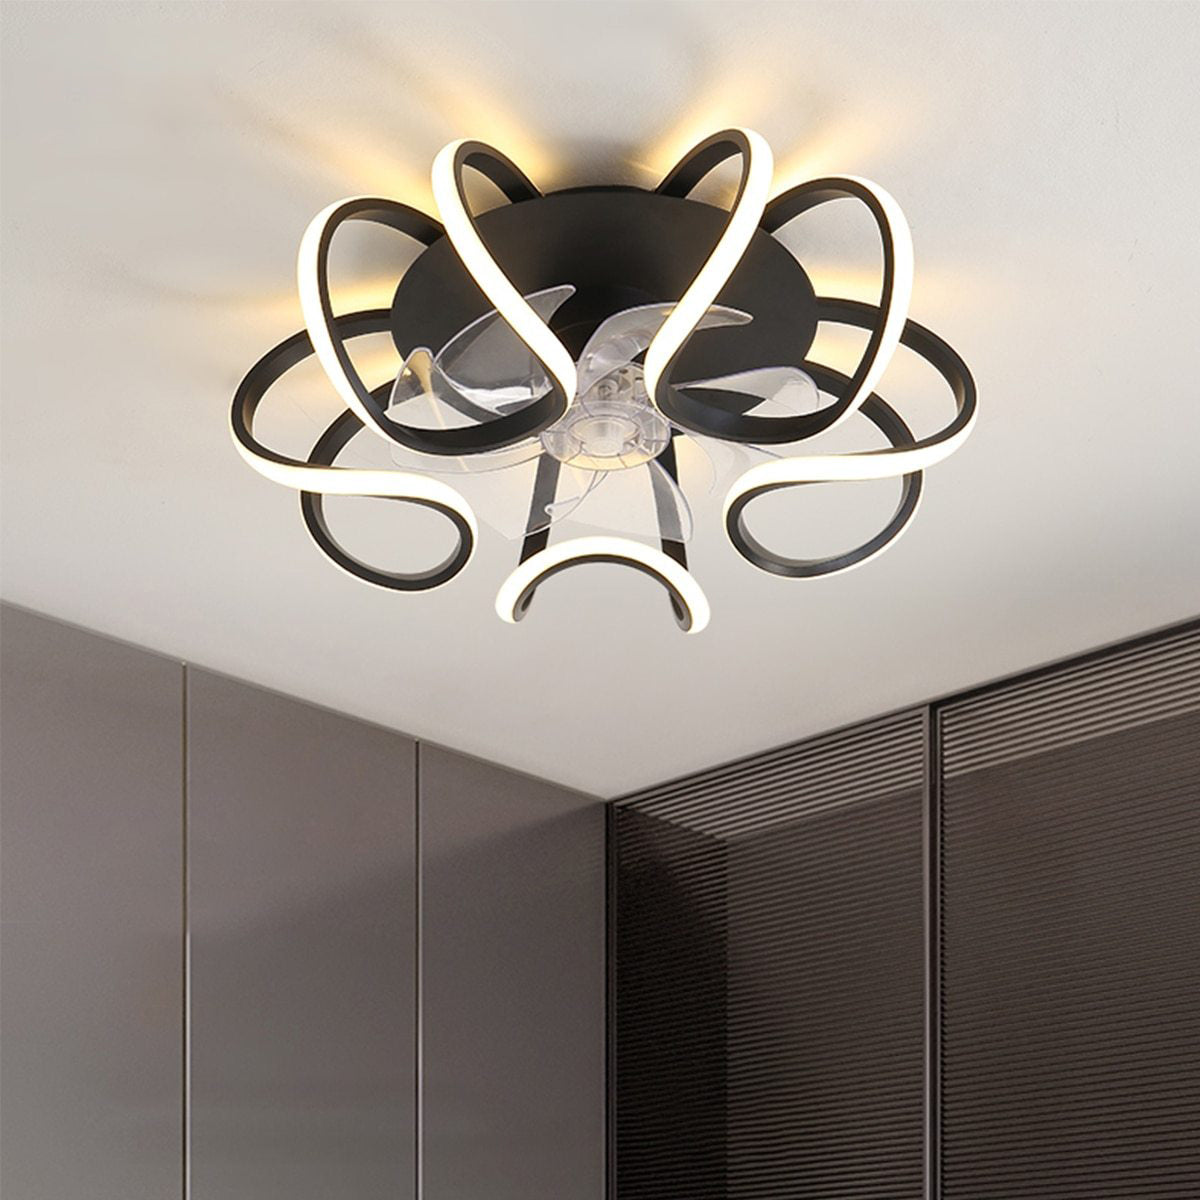 Led ceiling fan can be remotely controlled, bedroom decorative ceiling fan lamp